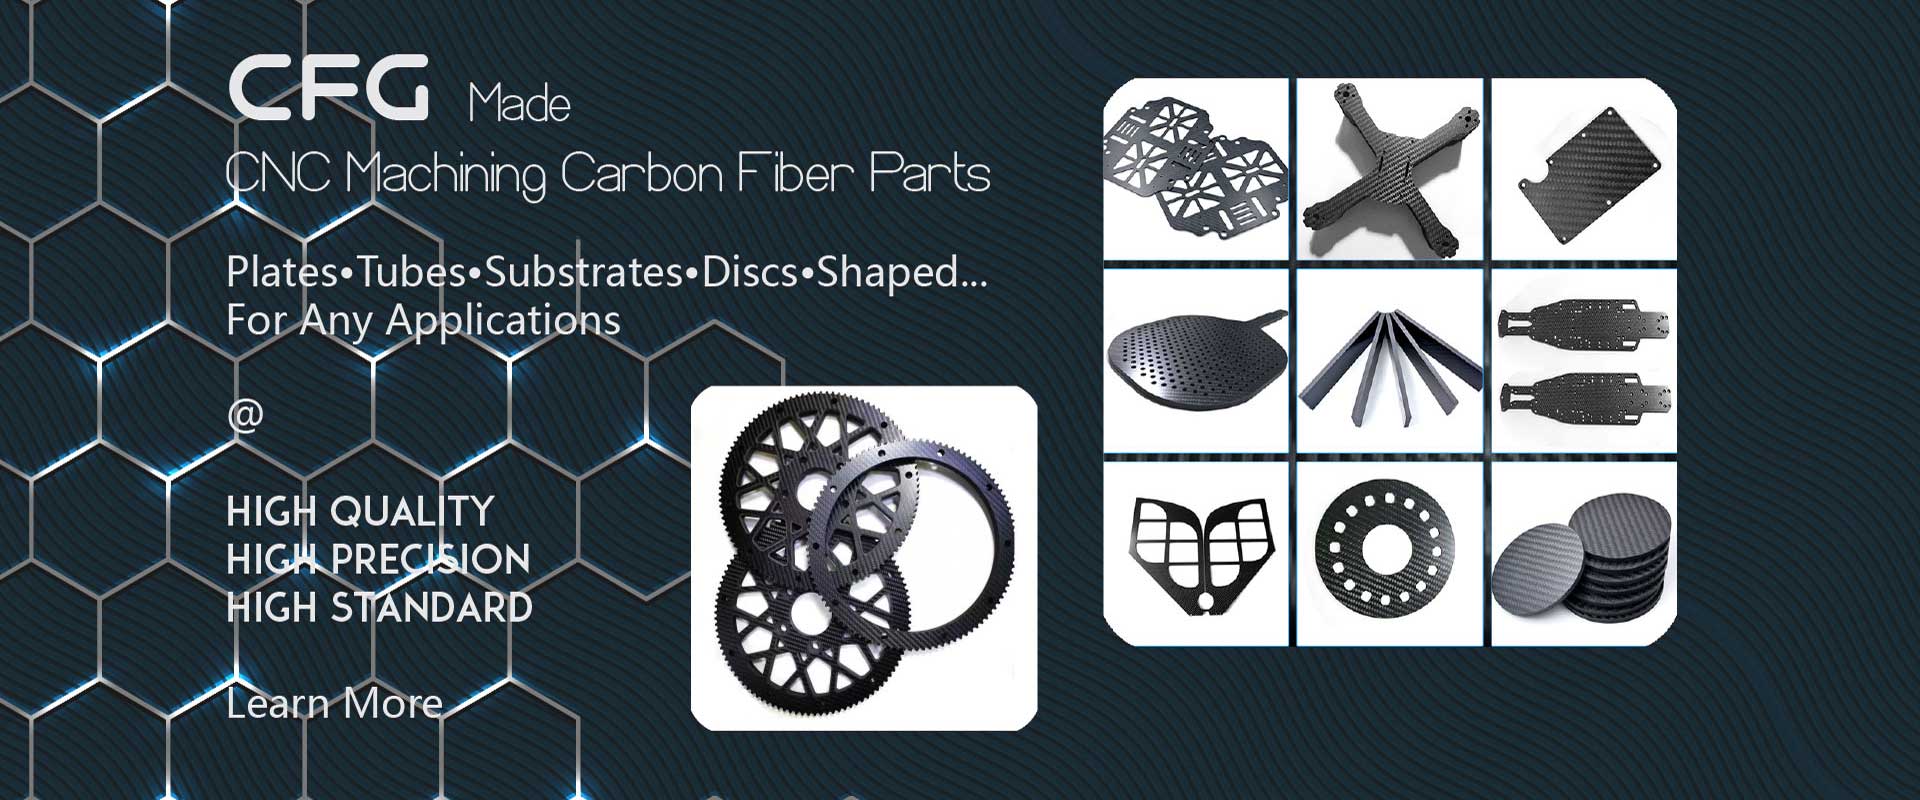 CarbonFiberGeek- carbon products wholesale center for people who are obsessed and love carbon fiber